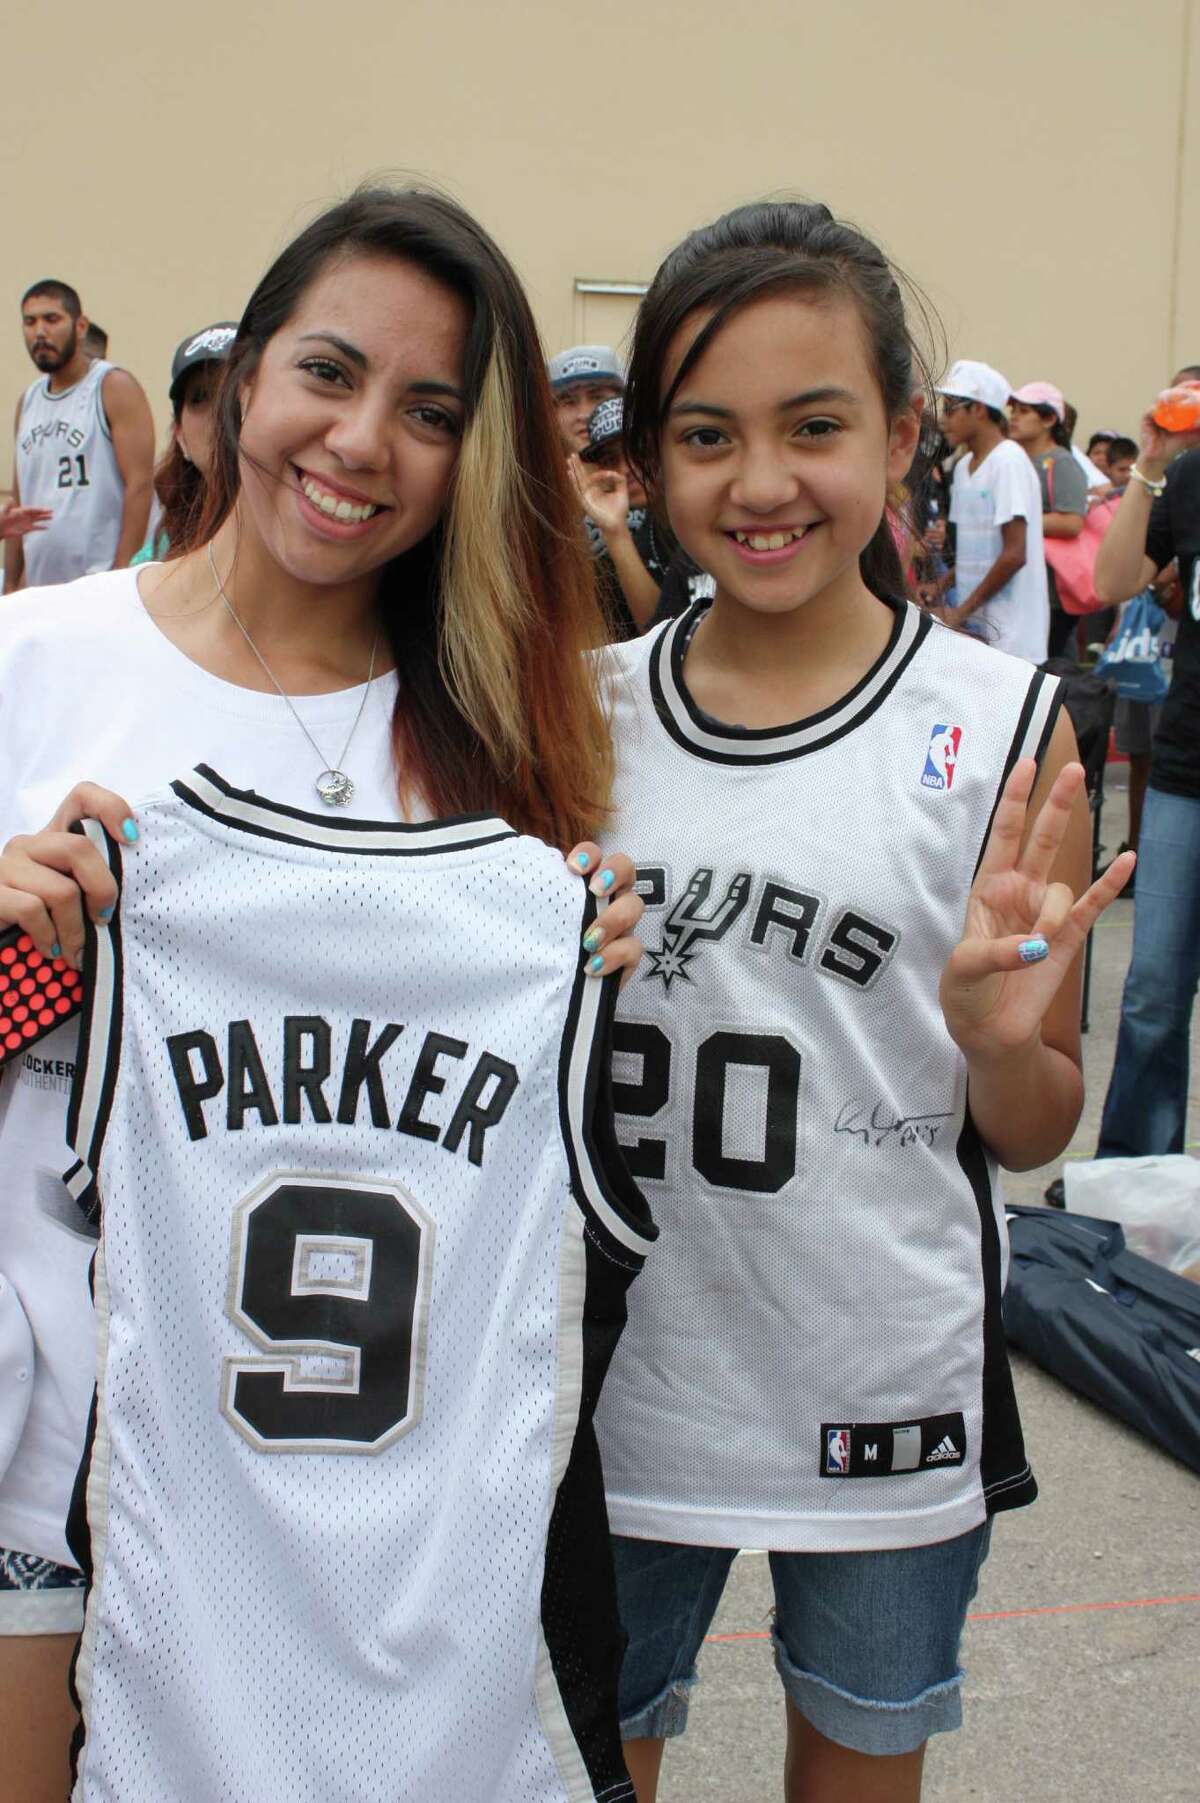 Fans flooded Academy Sports and Outdoors to take a picture and get an autograph with NBA champion Tony Parker.